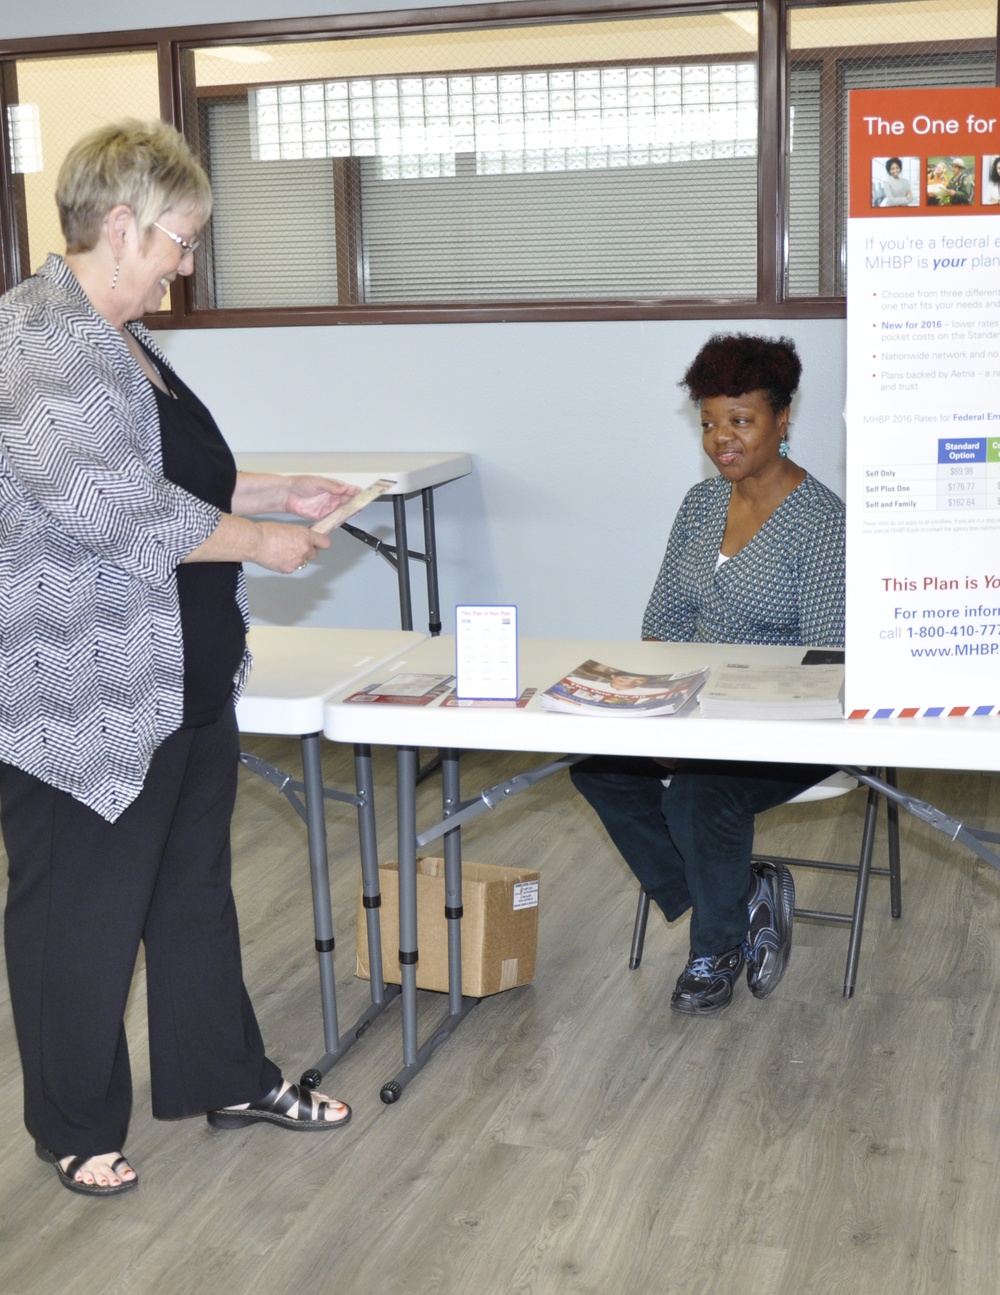 Cheri Magorno, multimedia specialist, asks questions of the Mail Handlers Benefits Program representative, Kitty McNeil, at the Benefits Fair held aboard Marine Corps Logistics Base Barstow, Calif., Oct. 28